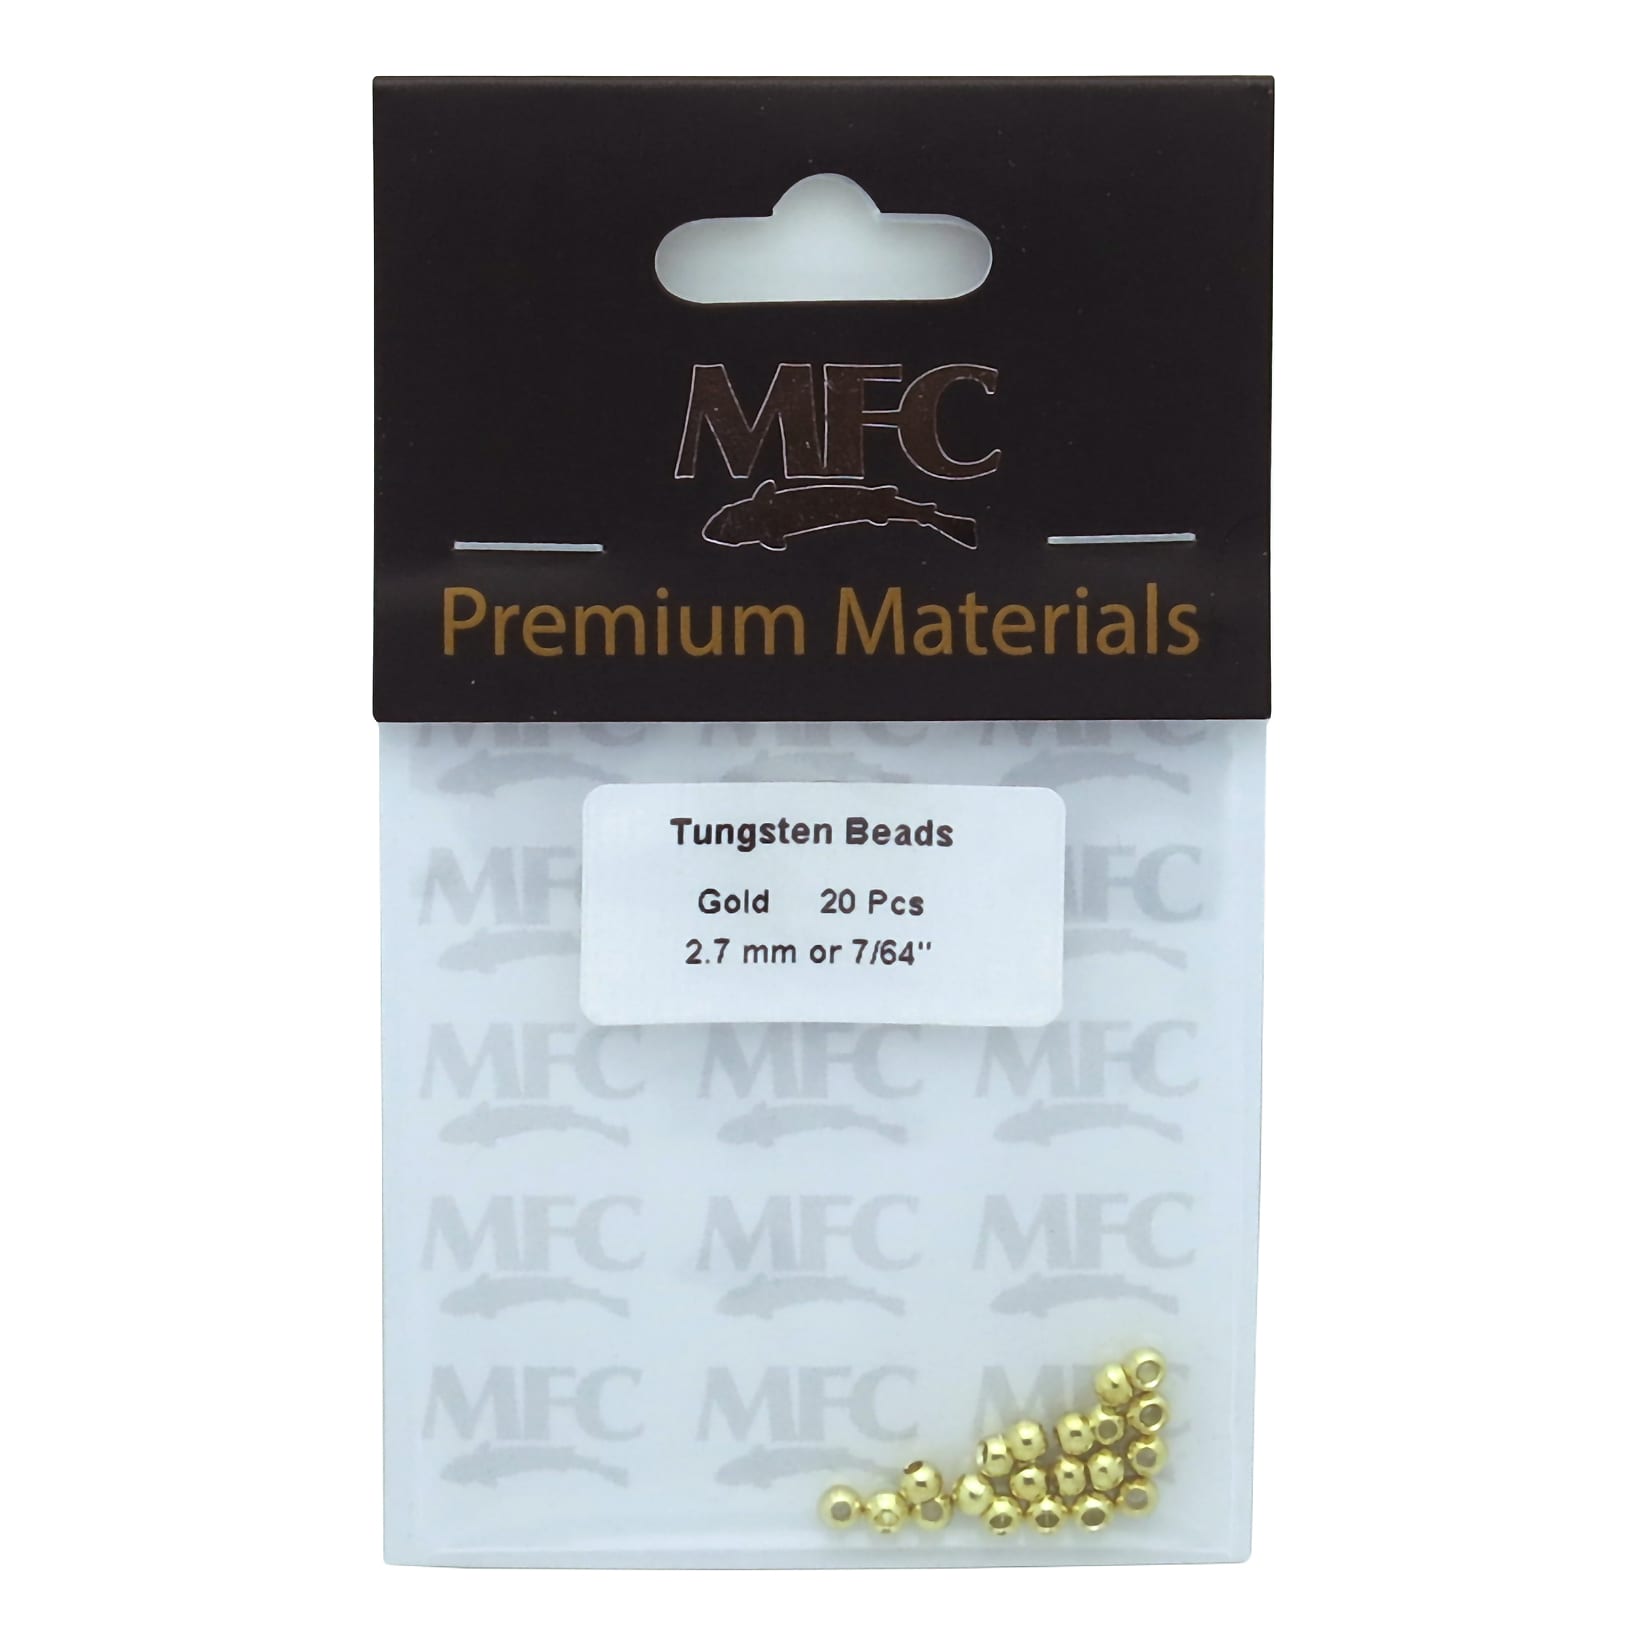 Montana Fly Company Tungsten Round Beads - 7/64" - Gold